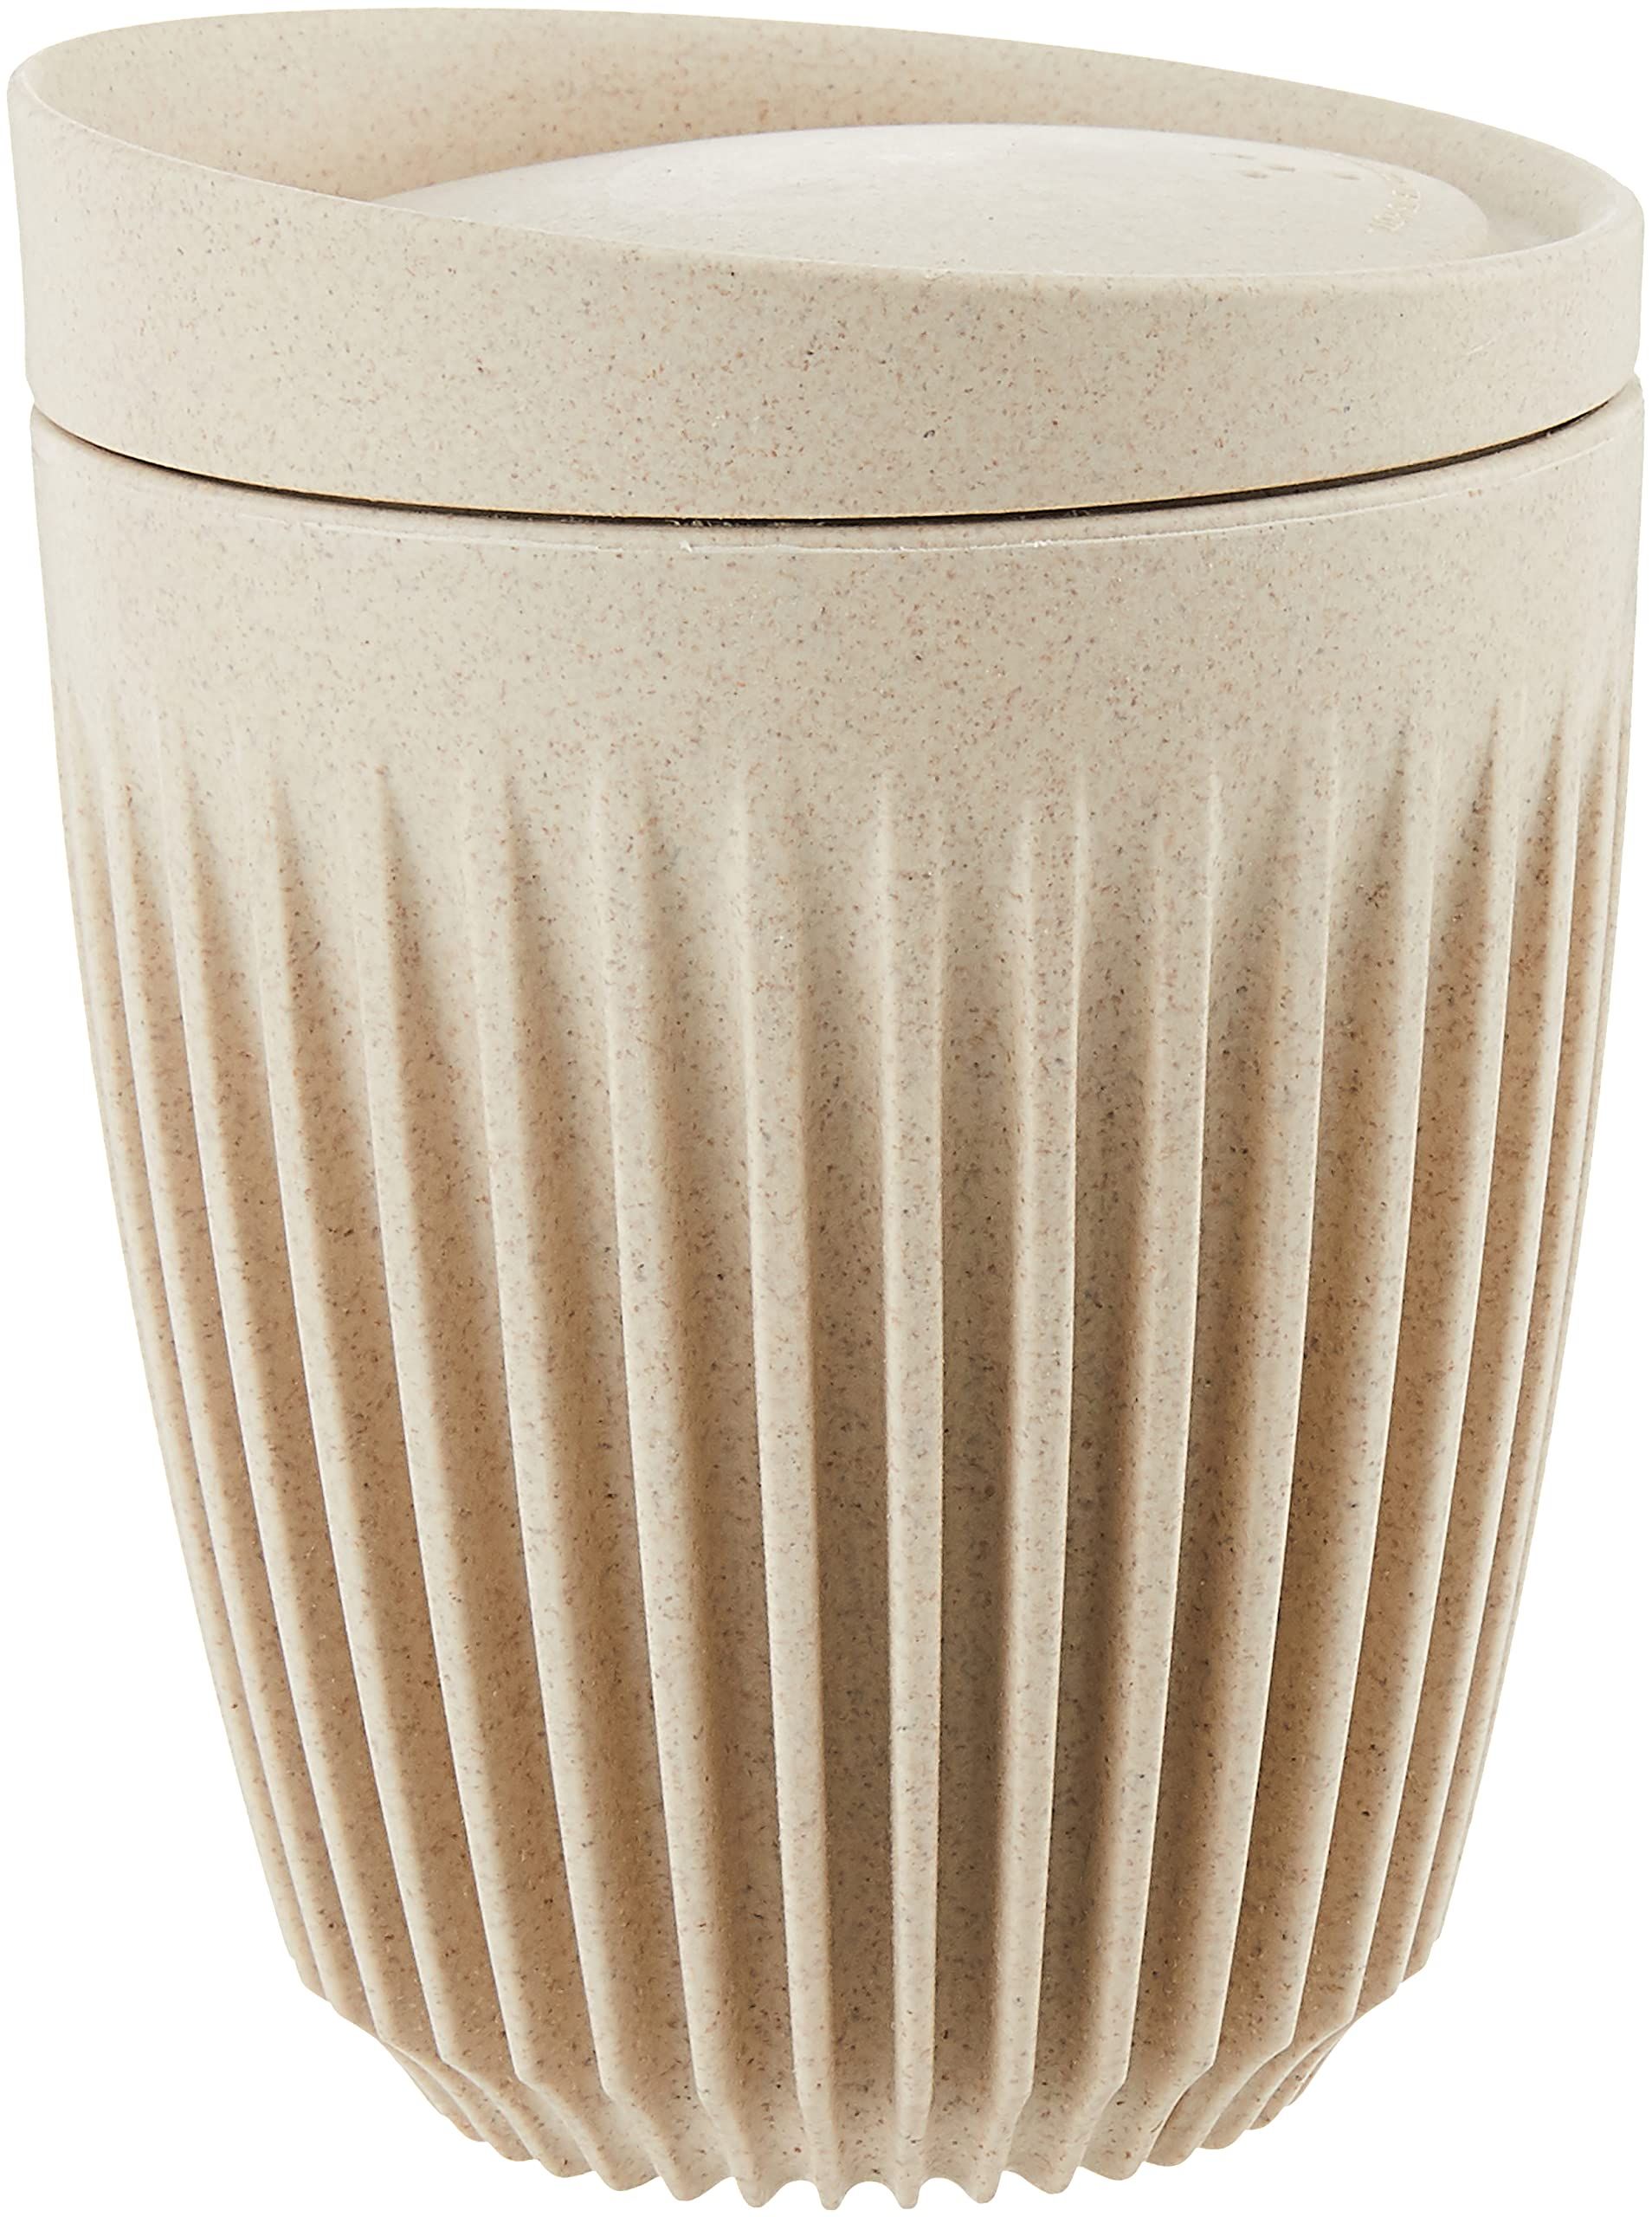 Huskee Cup | Reusable | Sustainable | Made from Coffee Husk | 8oz | Natural | With Lid | Amazon (US)